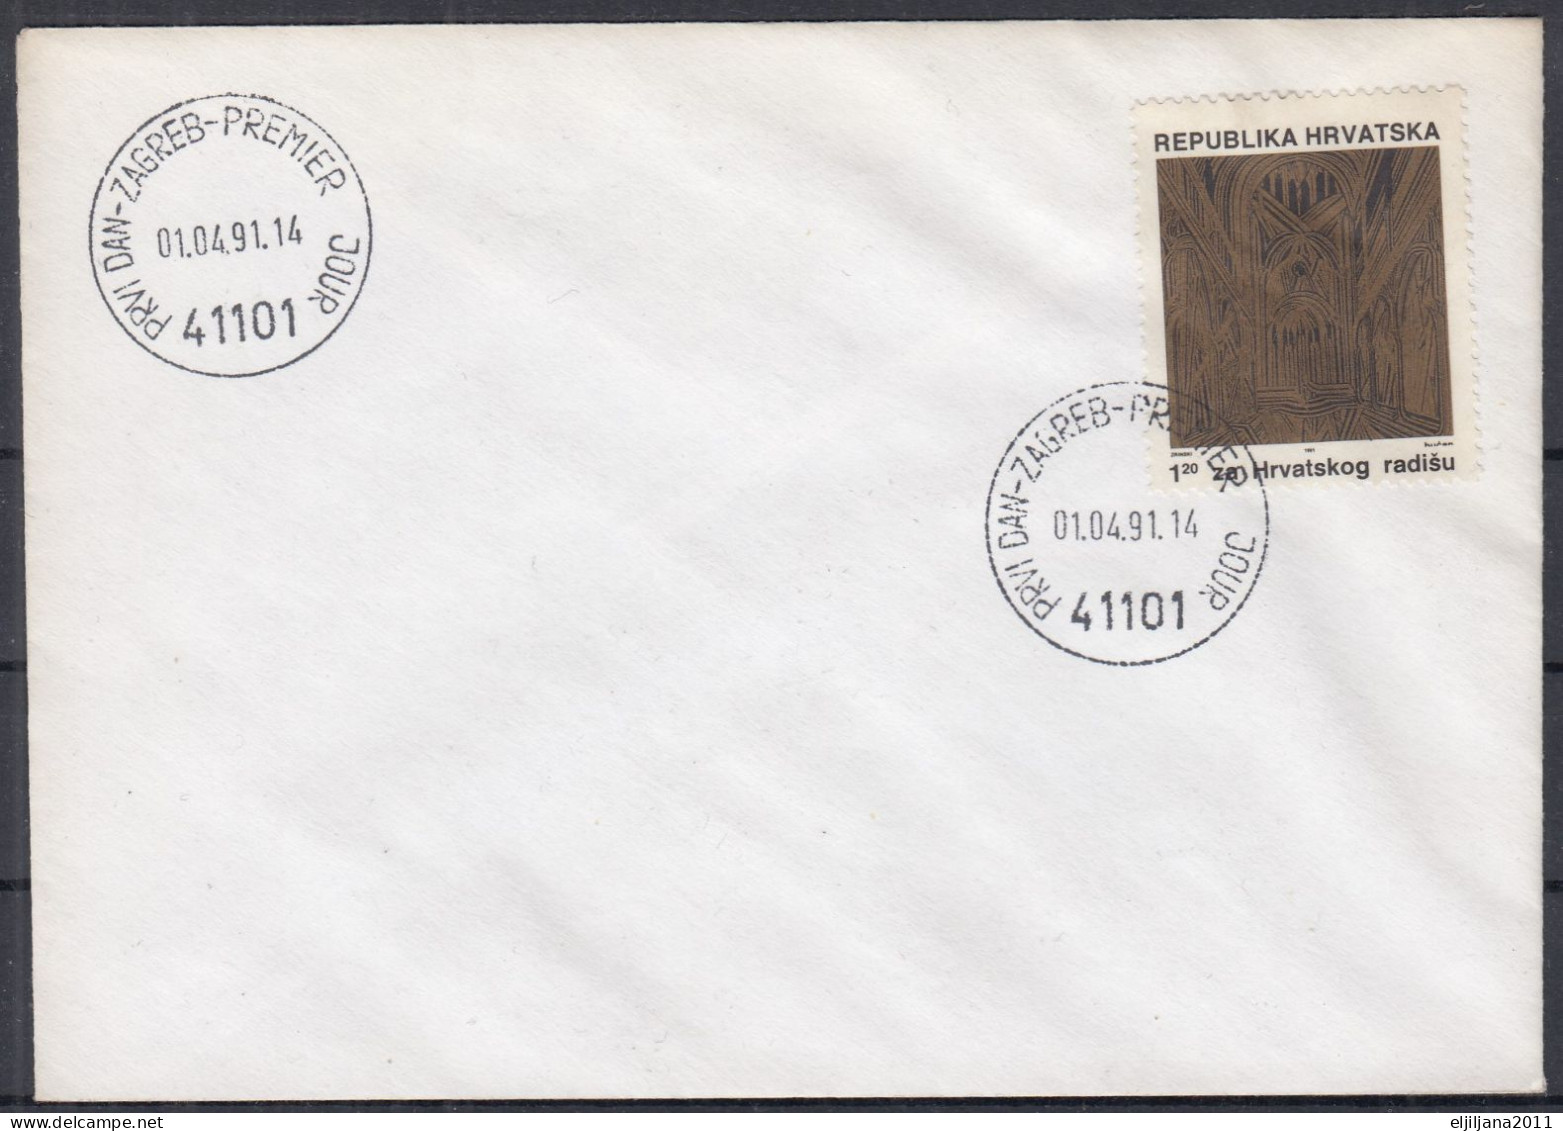 ⁕ CROATIA 1991 Hrvatska ⁕ Charity Stamps, Mass For The Homeland In The Cathedral Mi.8 ⁕ First Day Cover / Premier Jour - Croatie